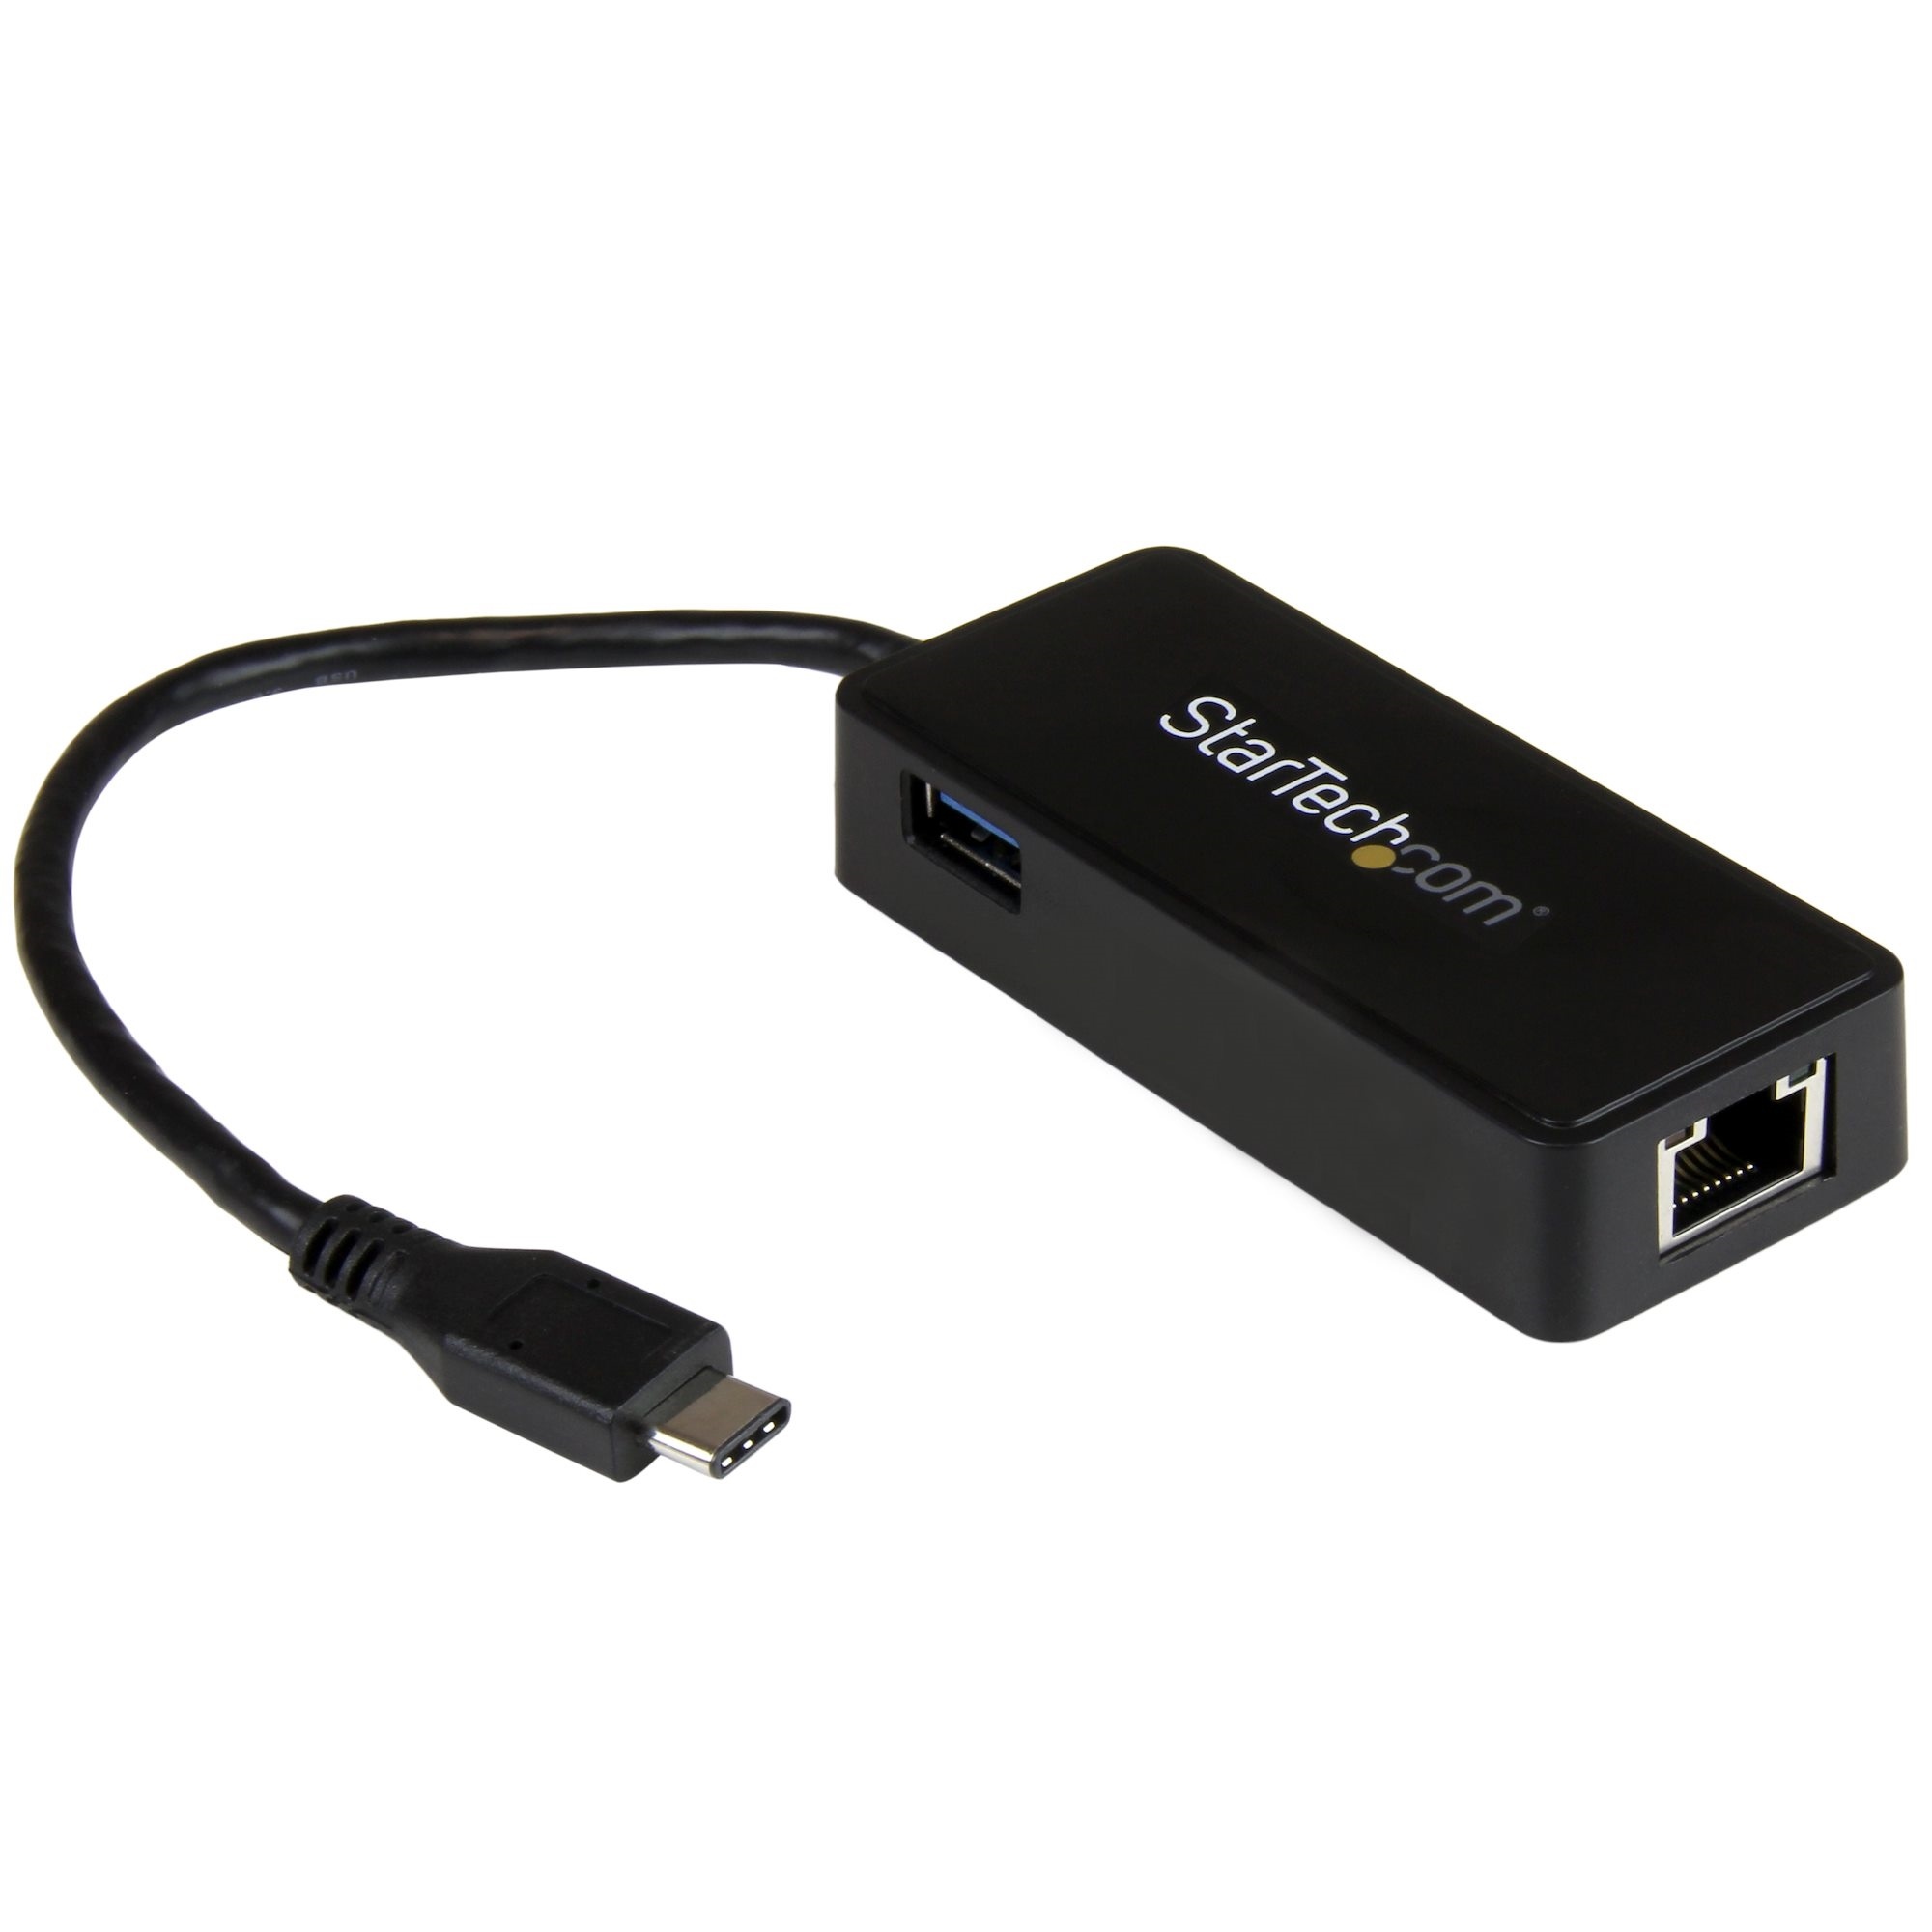 StarTech USB-C to Gigabit Network Adapter with Extra USB 3.0 Port (Black)